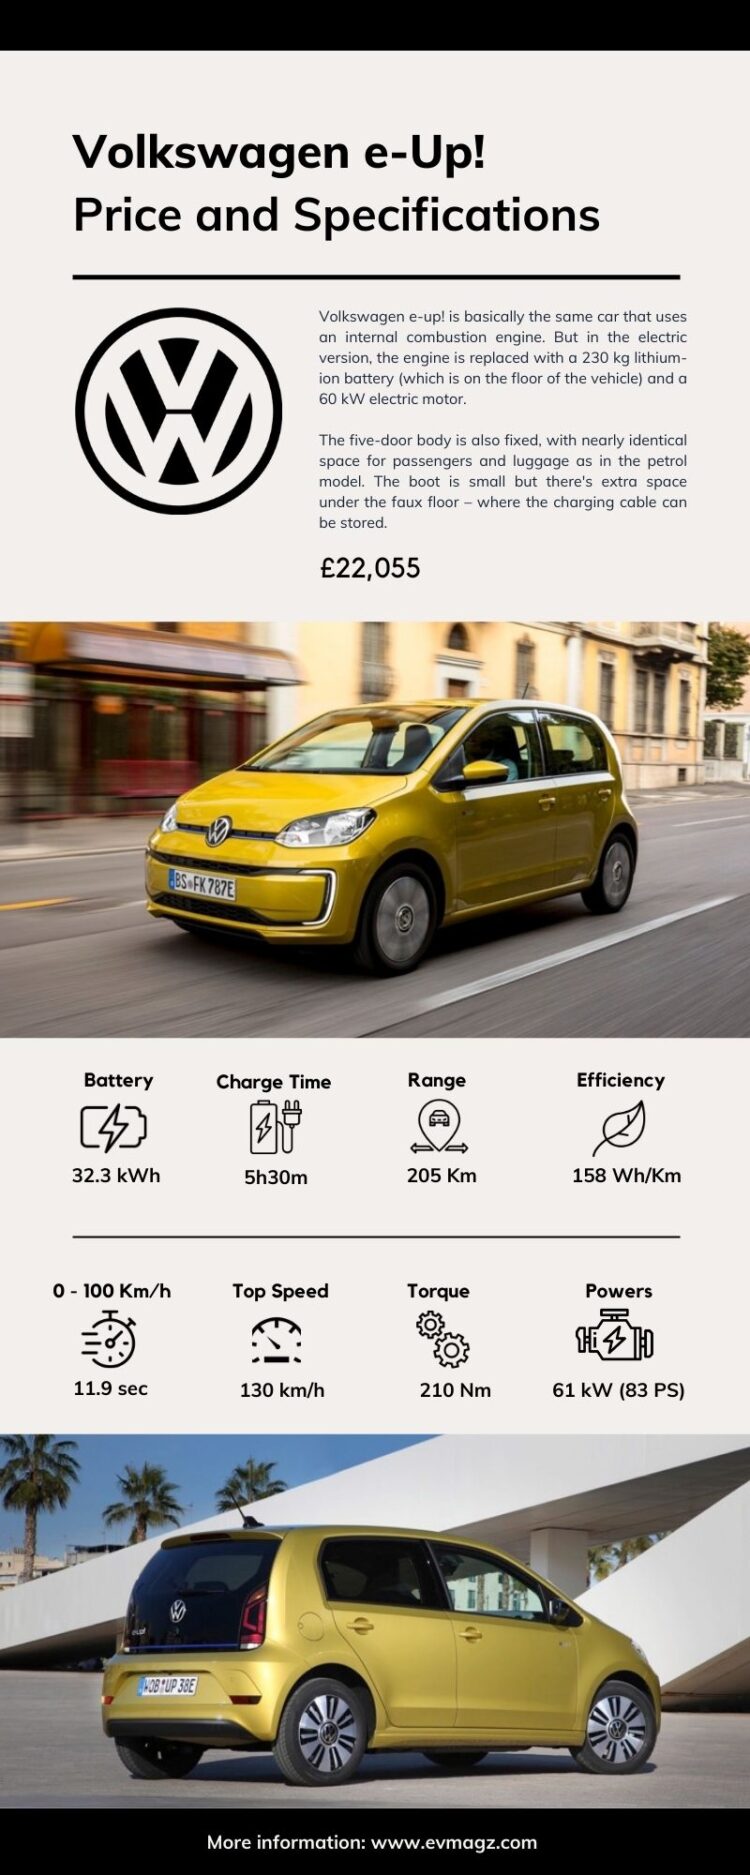 Volkswagen e-Up! Price and Specifications [Infographic]